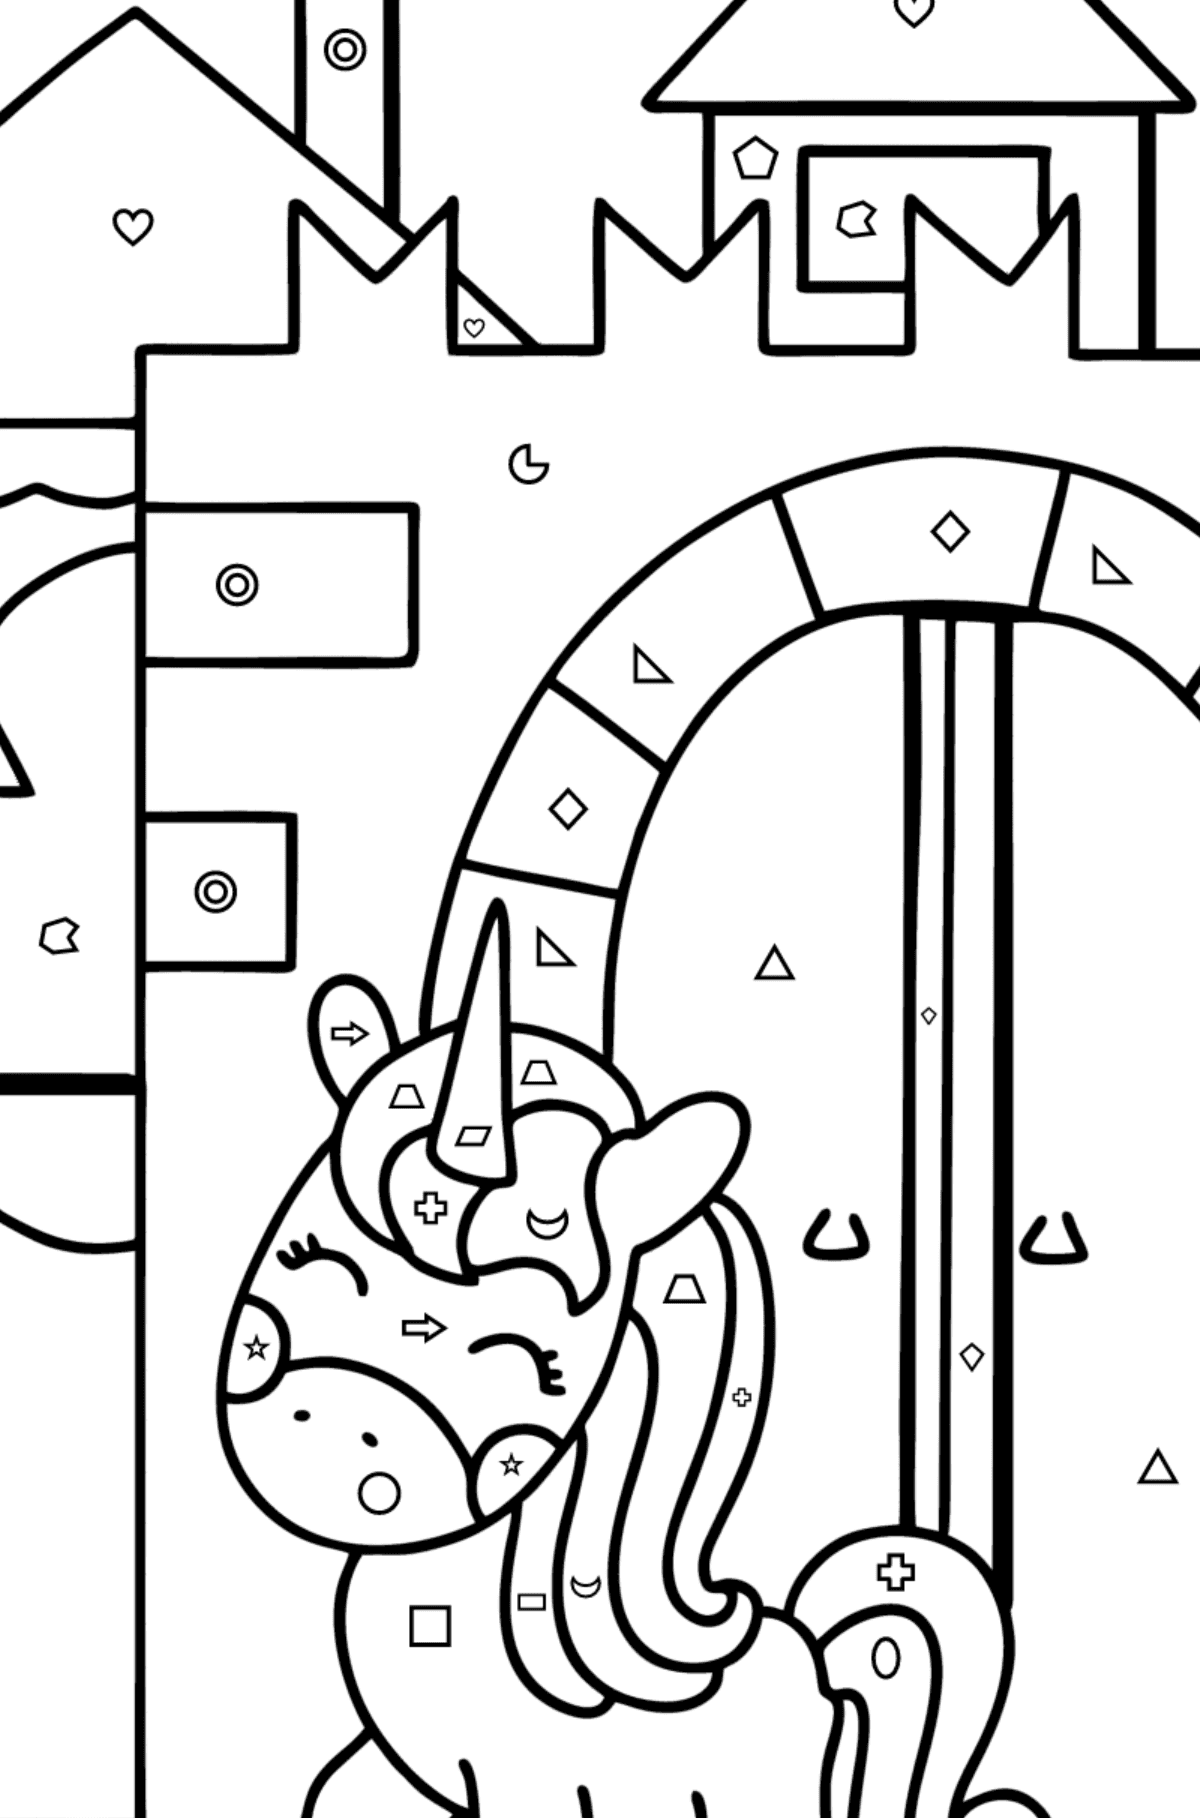 Dreamland coloring page - Coloring by Geometric Shapes for Kids